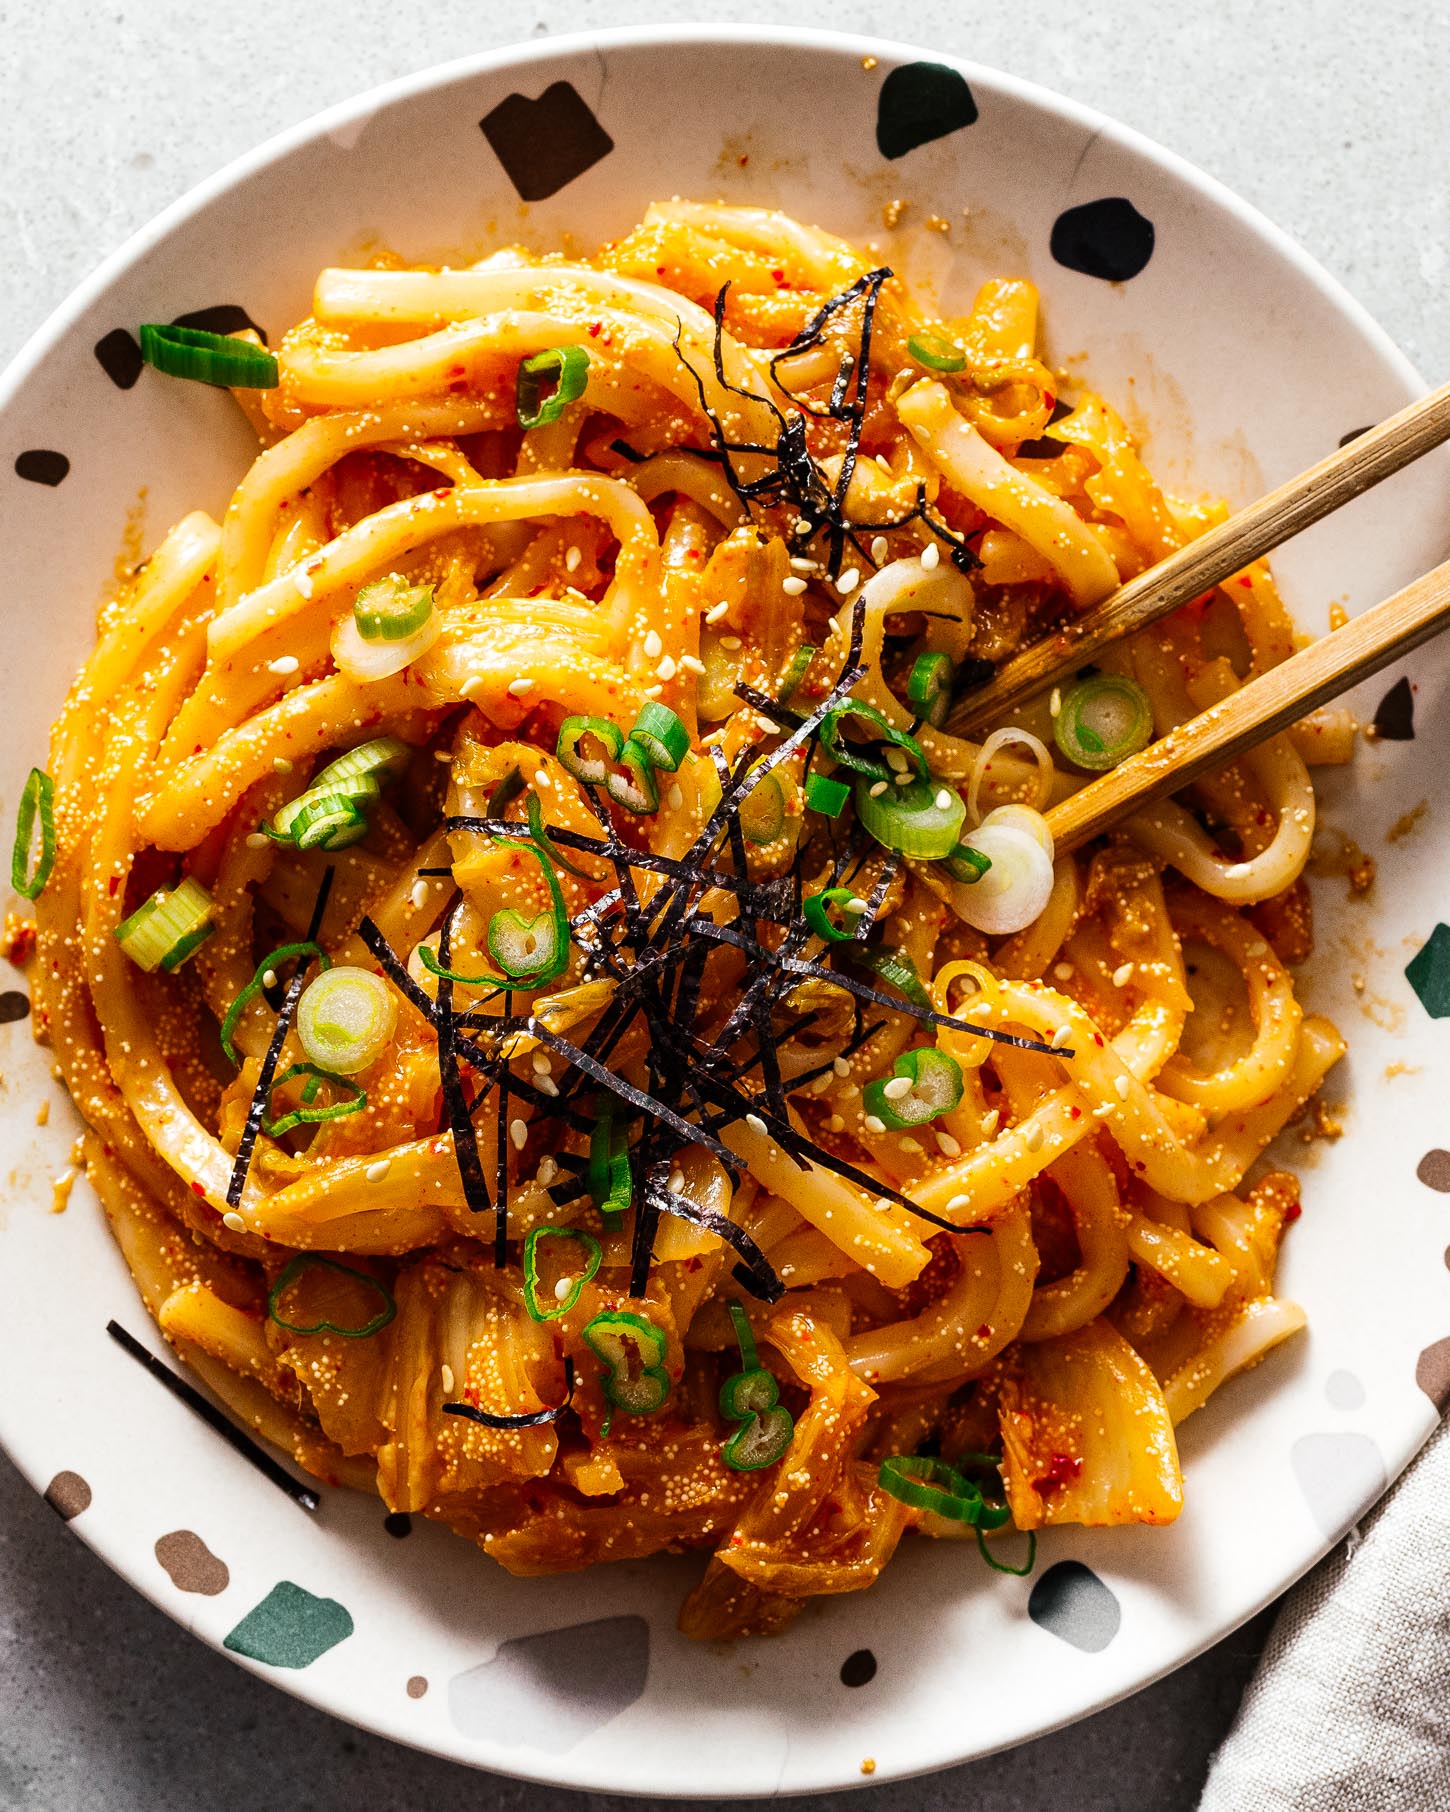 Spicy, Savory, and Completely Addictive Mentaiko Kimchi Udon Recipe | www.iamafoodblog.com